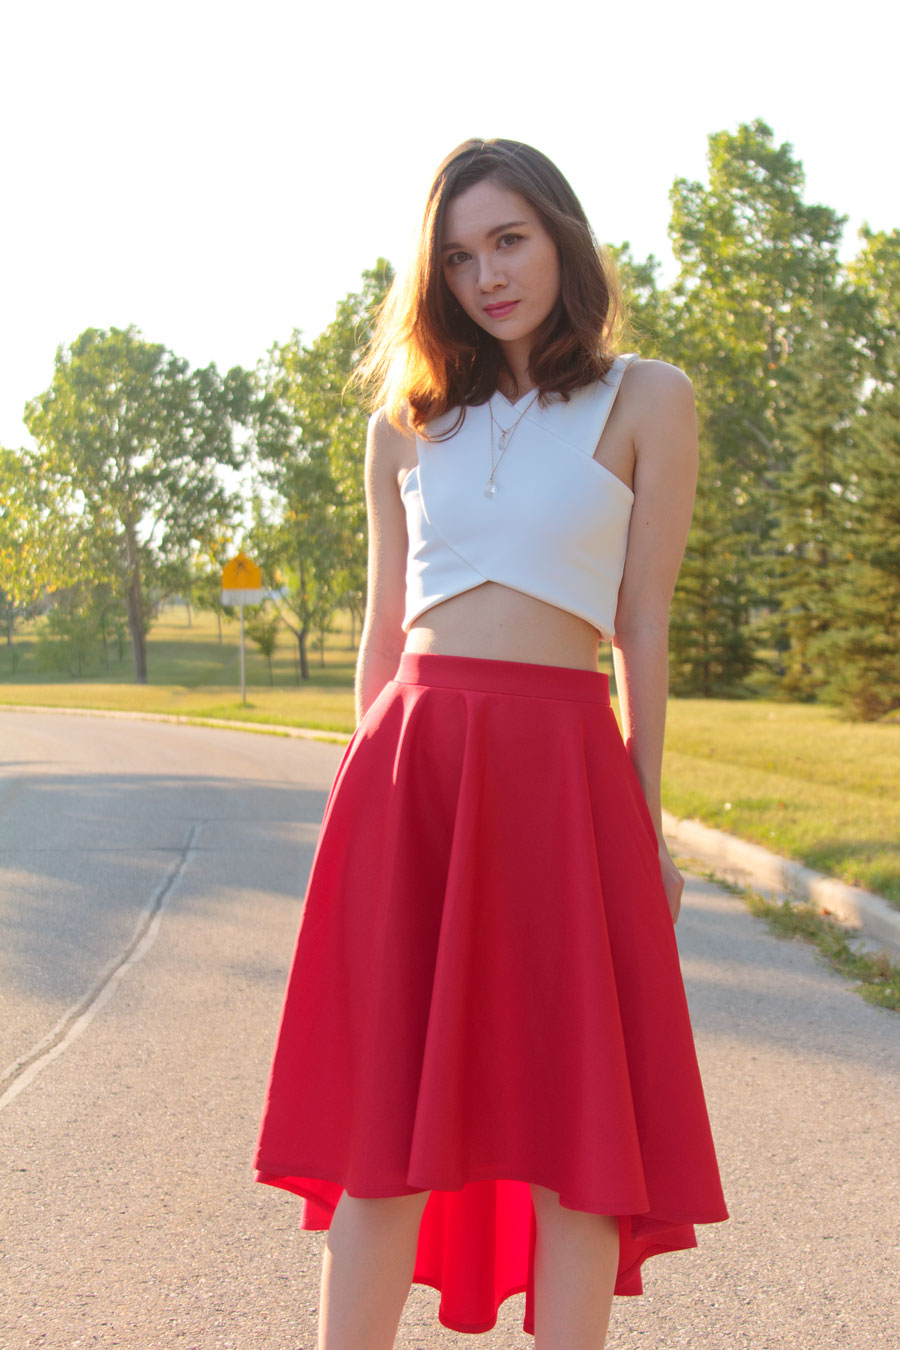 dipped hem, crop top, asymmetrical skirt, lace up sandals, summer fashion, outfit, personal style